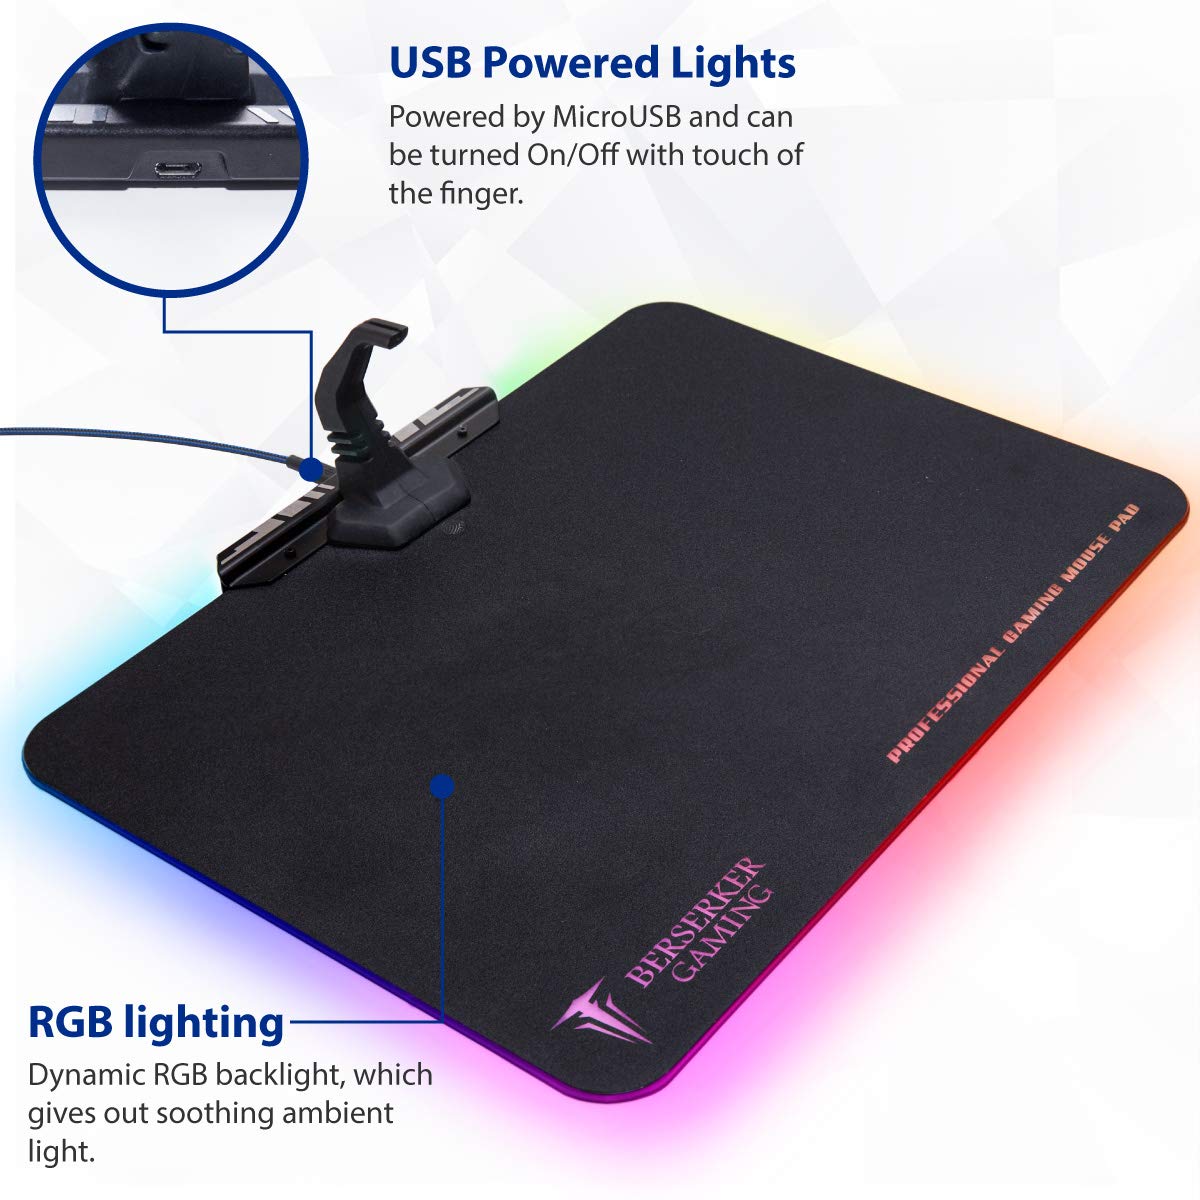 Large RGB LED Gaming Mouse Pad Hard Micro Texture Surface -7 Light Up Modes - Mouse Bungee Cable Manager Holder Attachment - PC; Mac; Linux